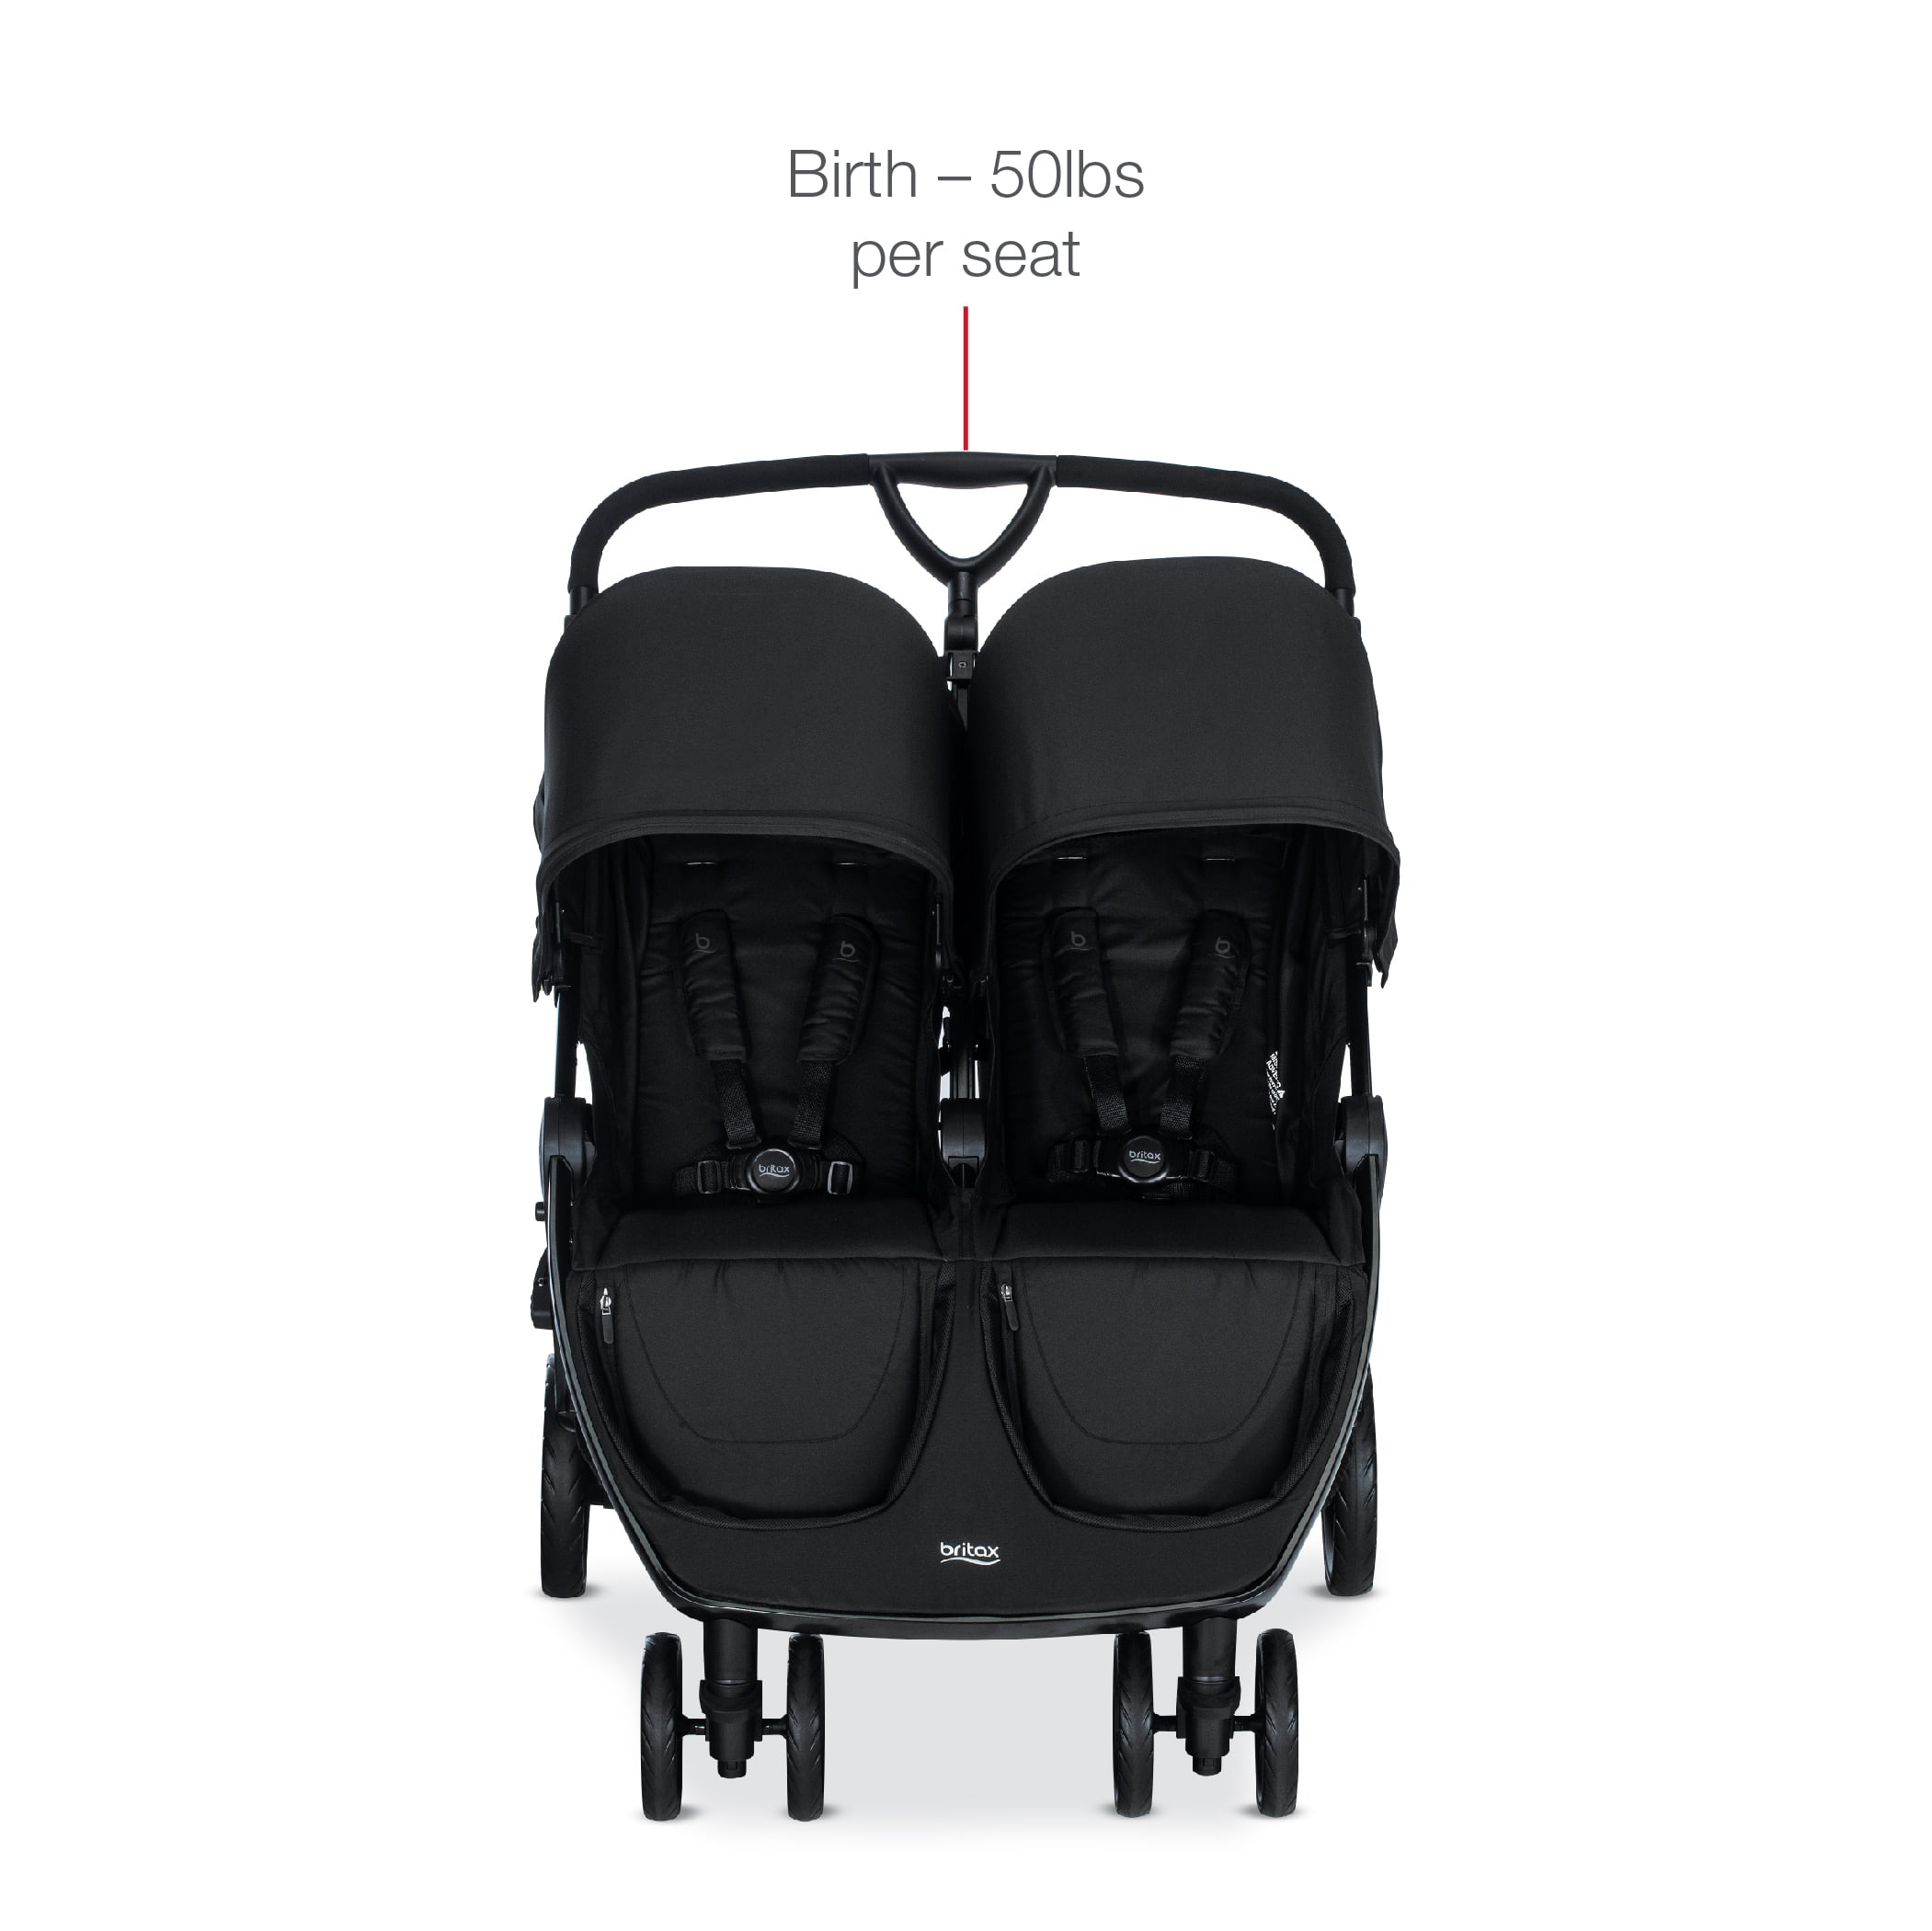 britax b lively double stroller